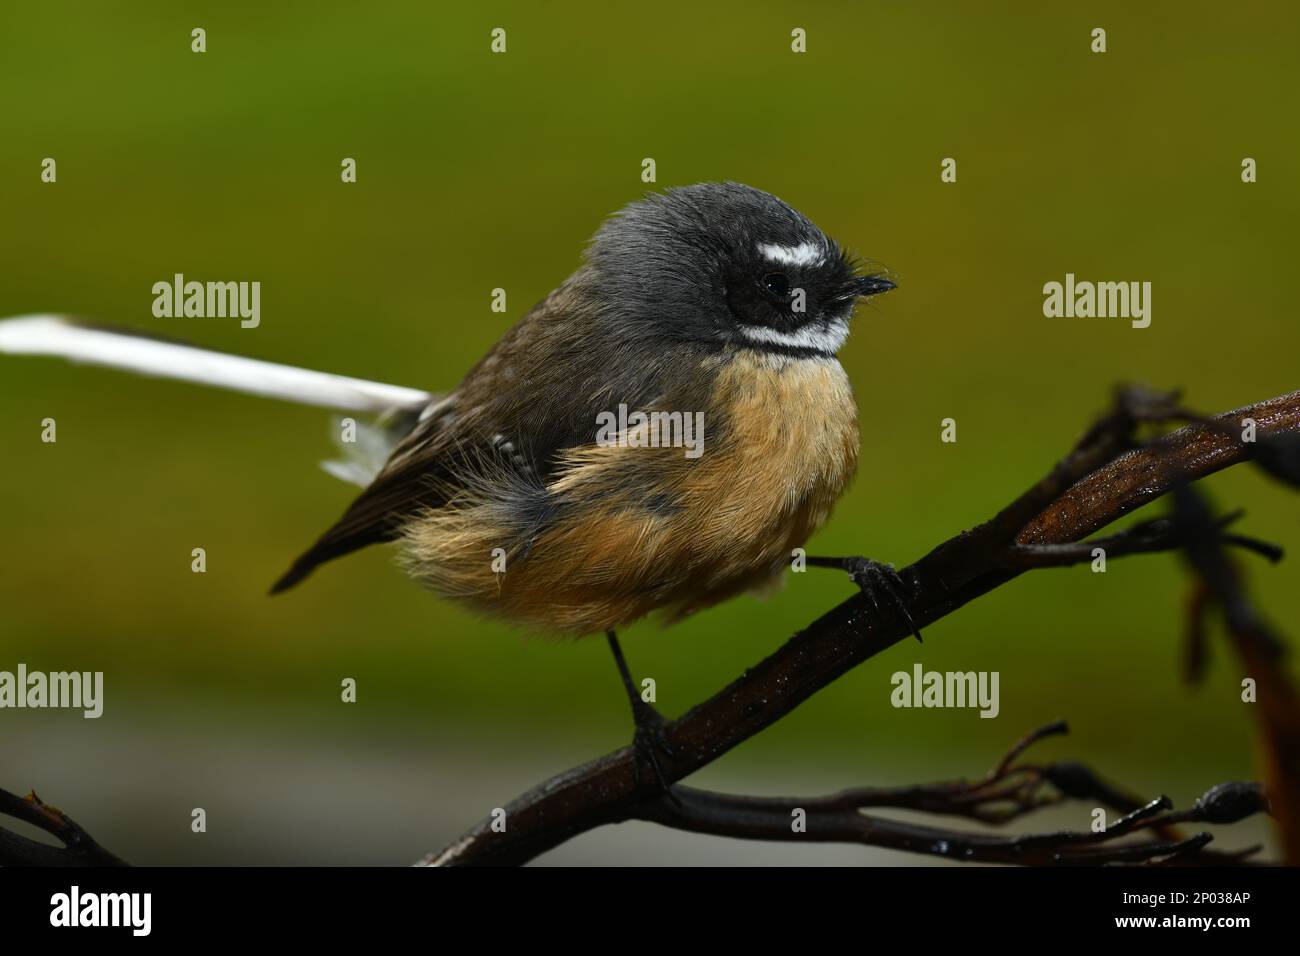 New Zealand fantail (Rhipidura fuliginosa) a small insectivorous bird, the only species of fantail in New Zealand. Stock Photo